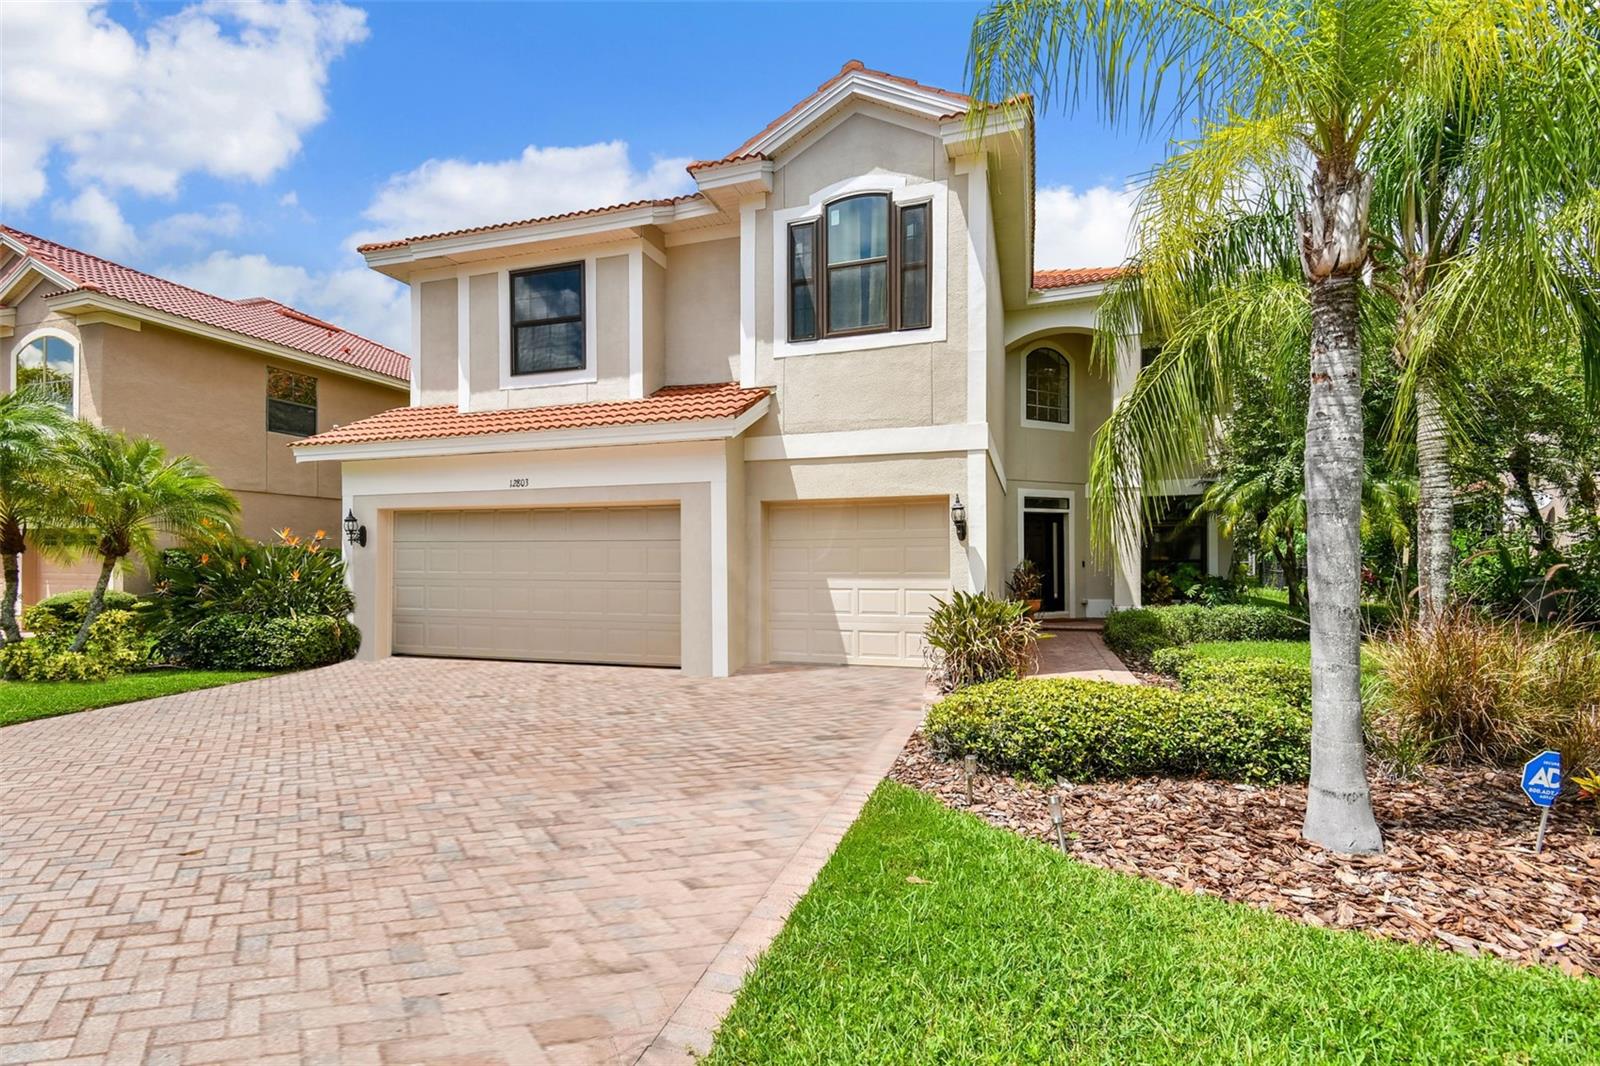 Details for 12803 Darby Ridge Drive, TAMPA, FL 33624